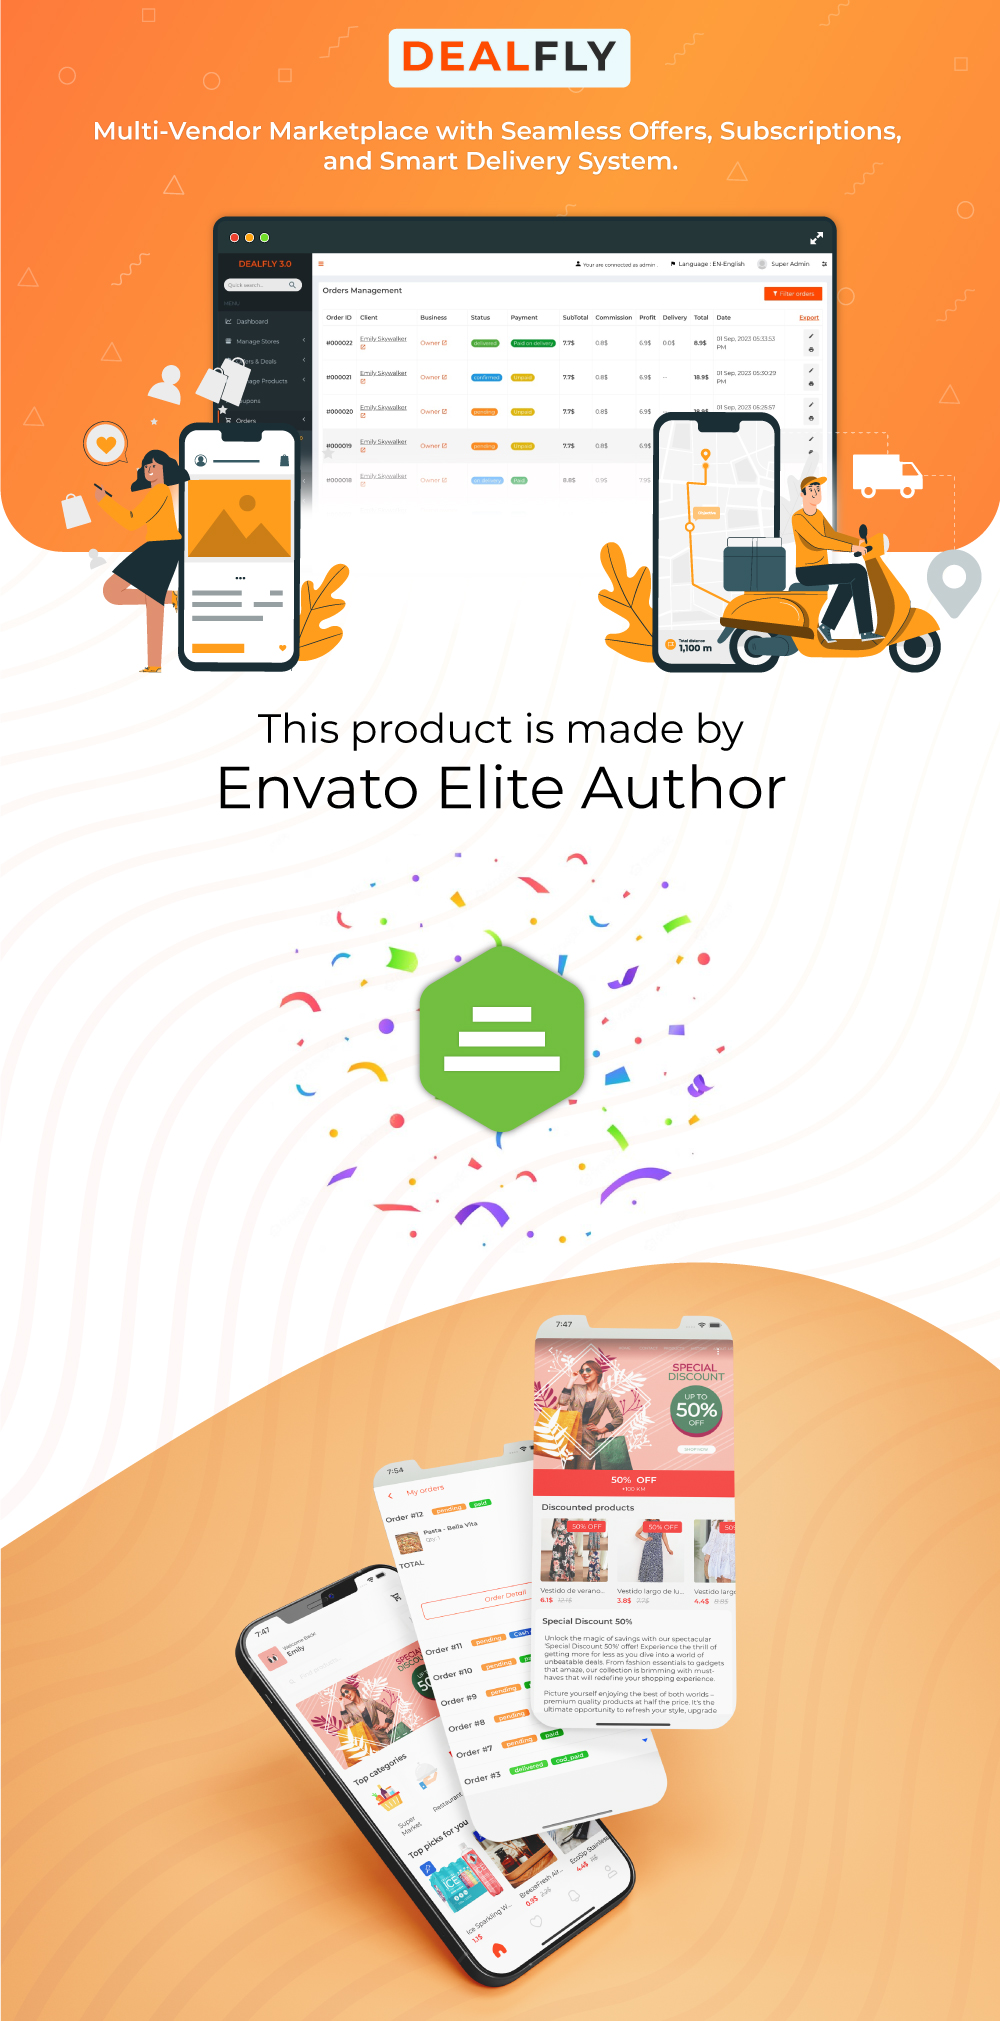 Dealfly - E-commerce & Multi-Vendor Marketplace with Offers, Subscriptions, and Delivery App V3.0 - 5